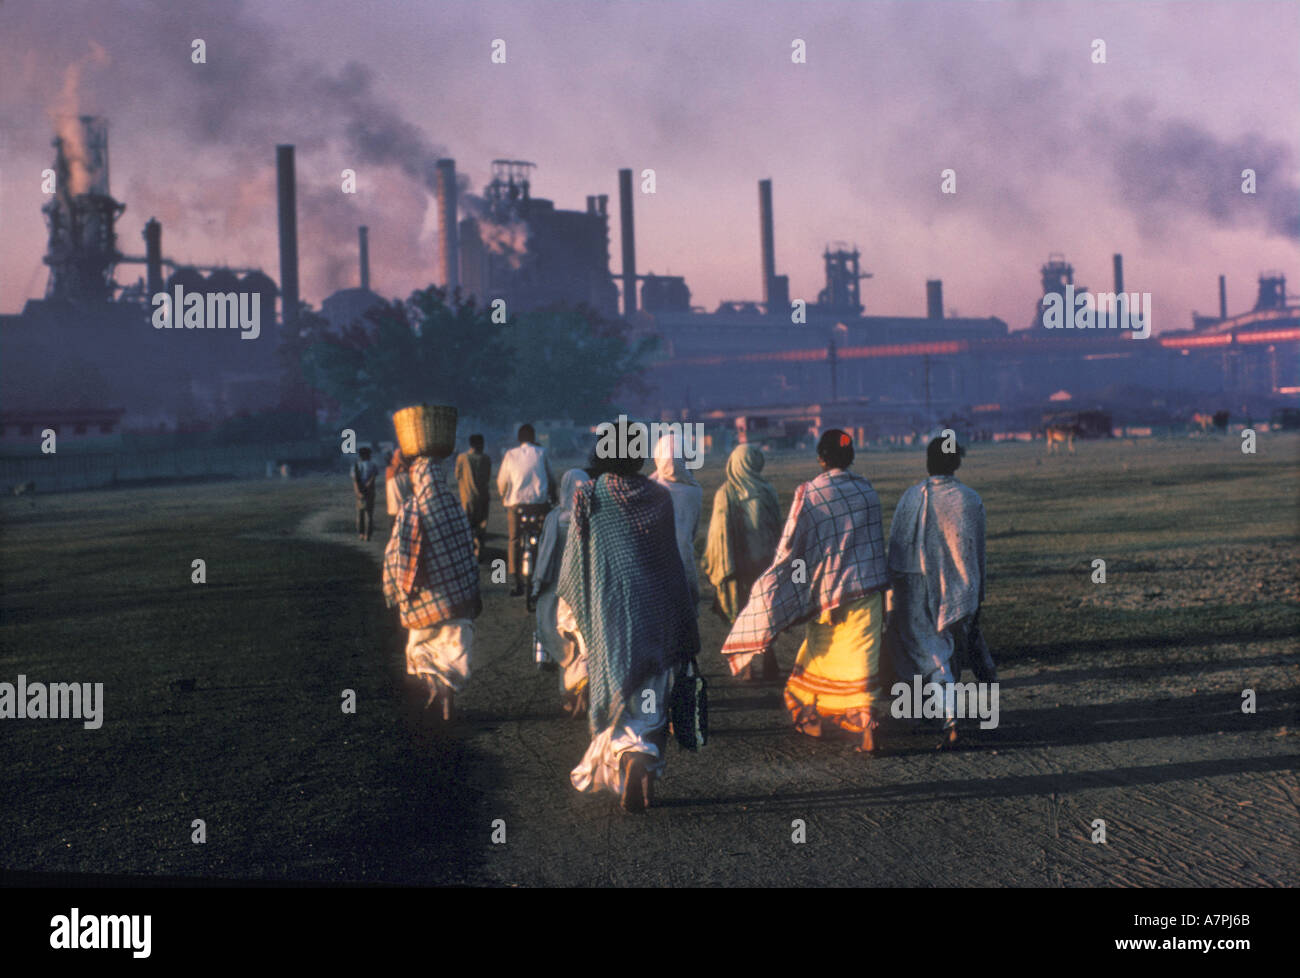 Indian women in saris with baskets on their heads troop to work at industrial site and power station at sunrise in smoke Stock Photo